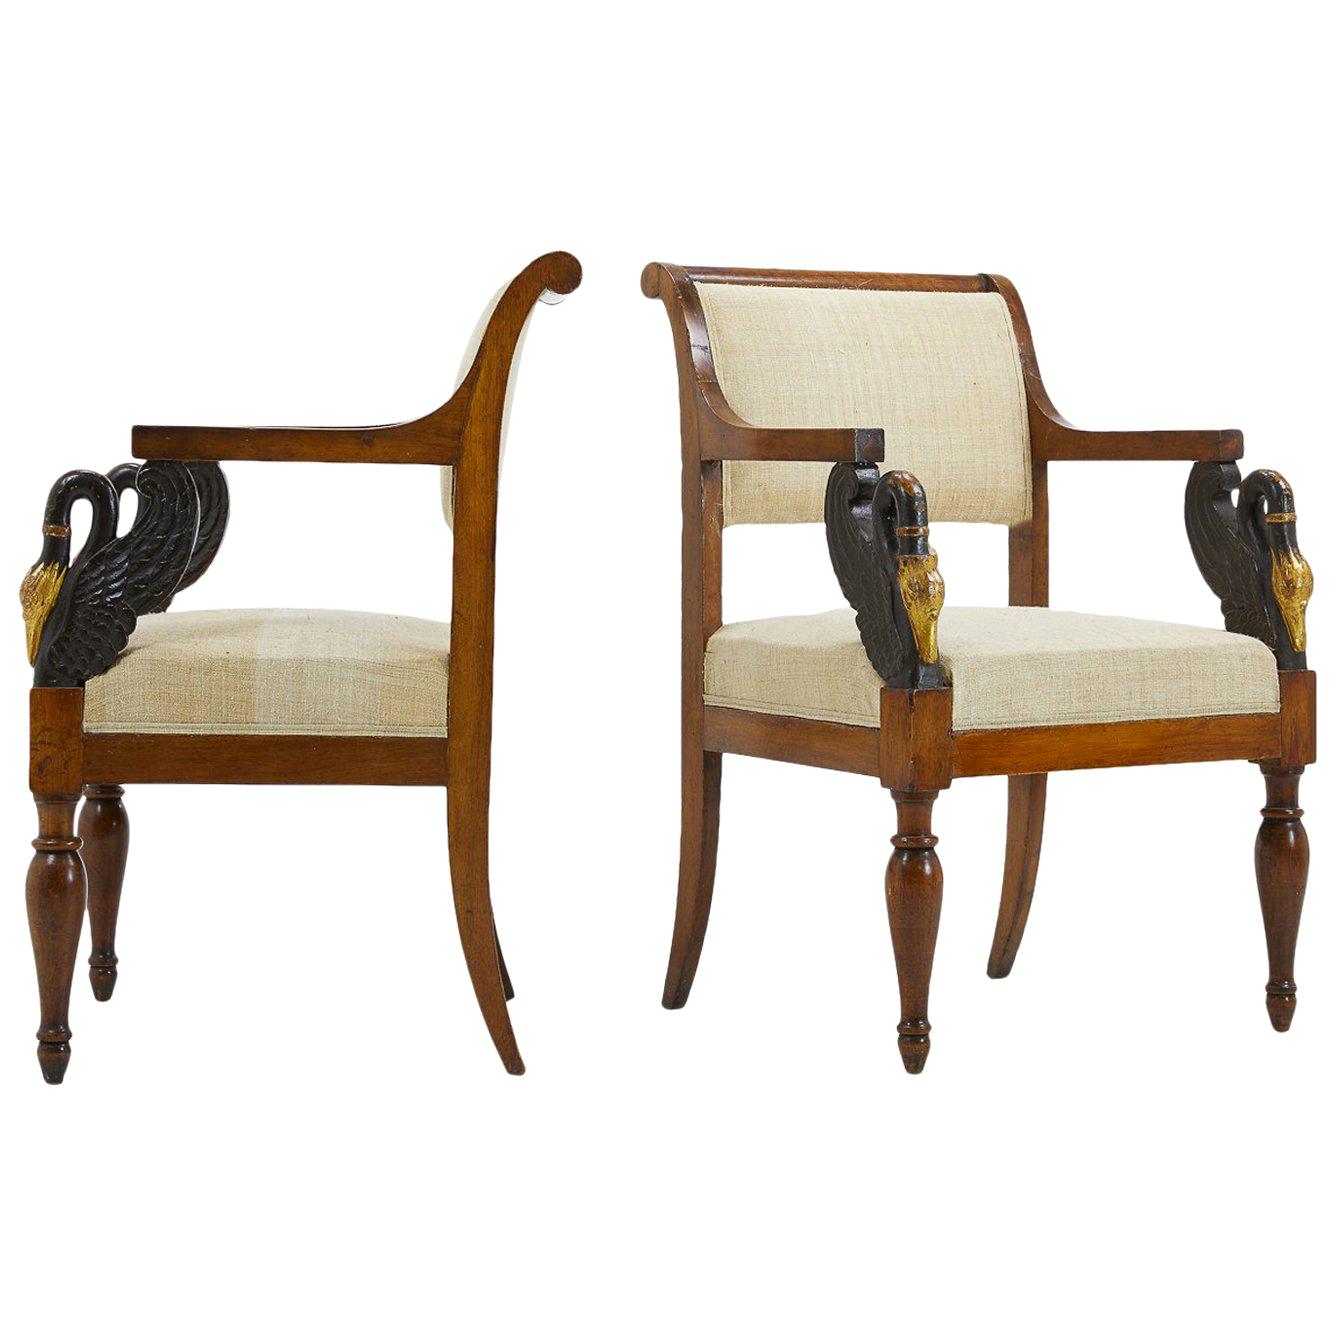 Pair of Early 19th Century Italian Walnut and Ebonised Chairs with Gilding